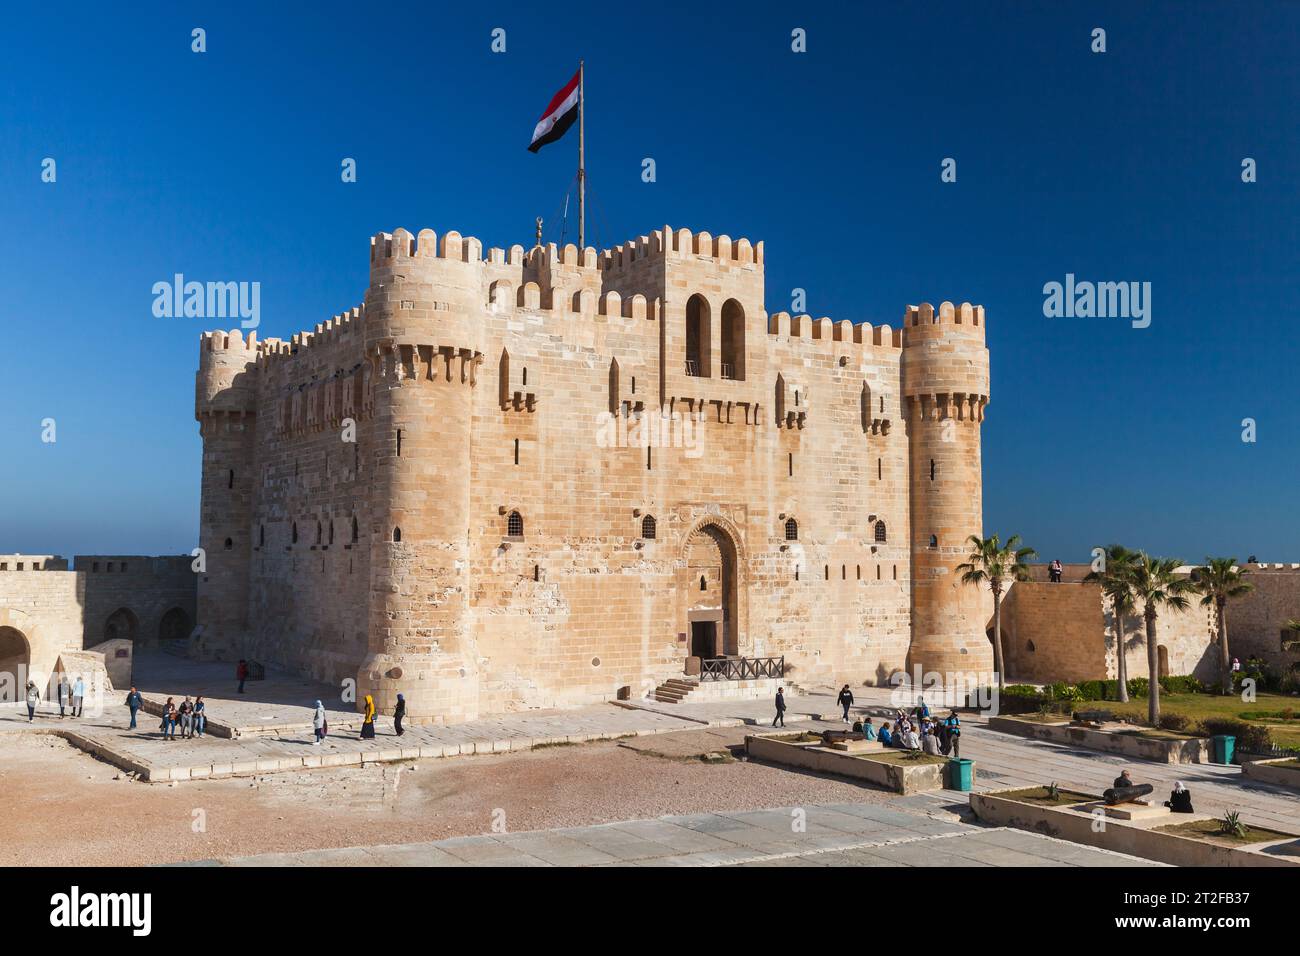 Alexandria, Egypt - December 14, 2018: People walk near The Citadel of Qaitbay or the Fort of Qaitbay. This is a 15th-century defensive fortress locat Stock Photo